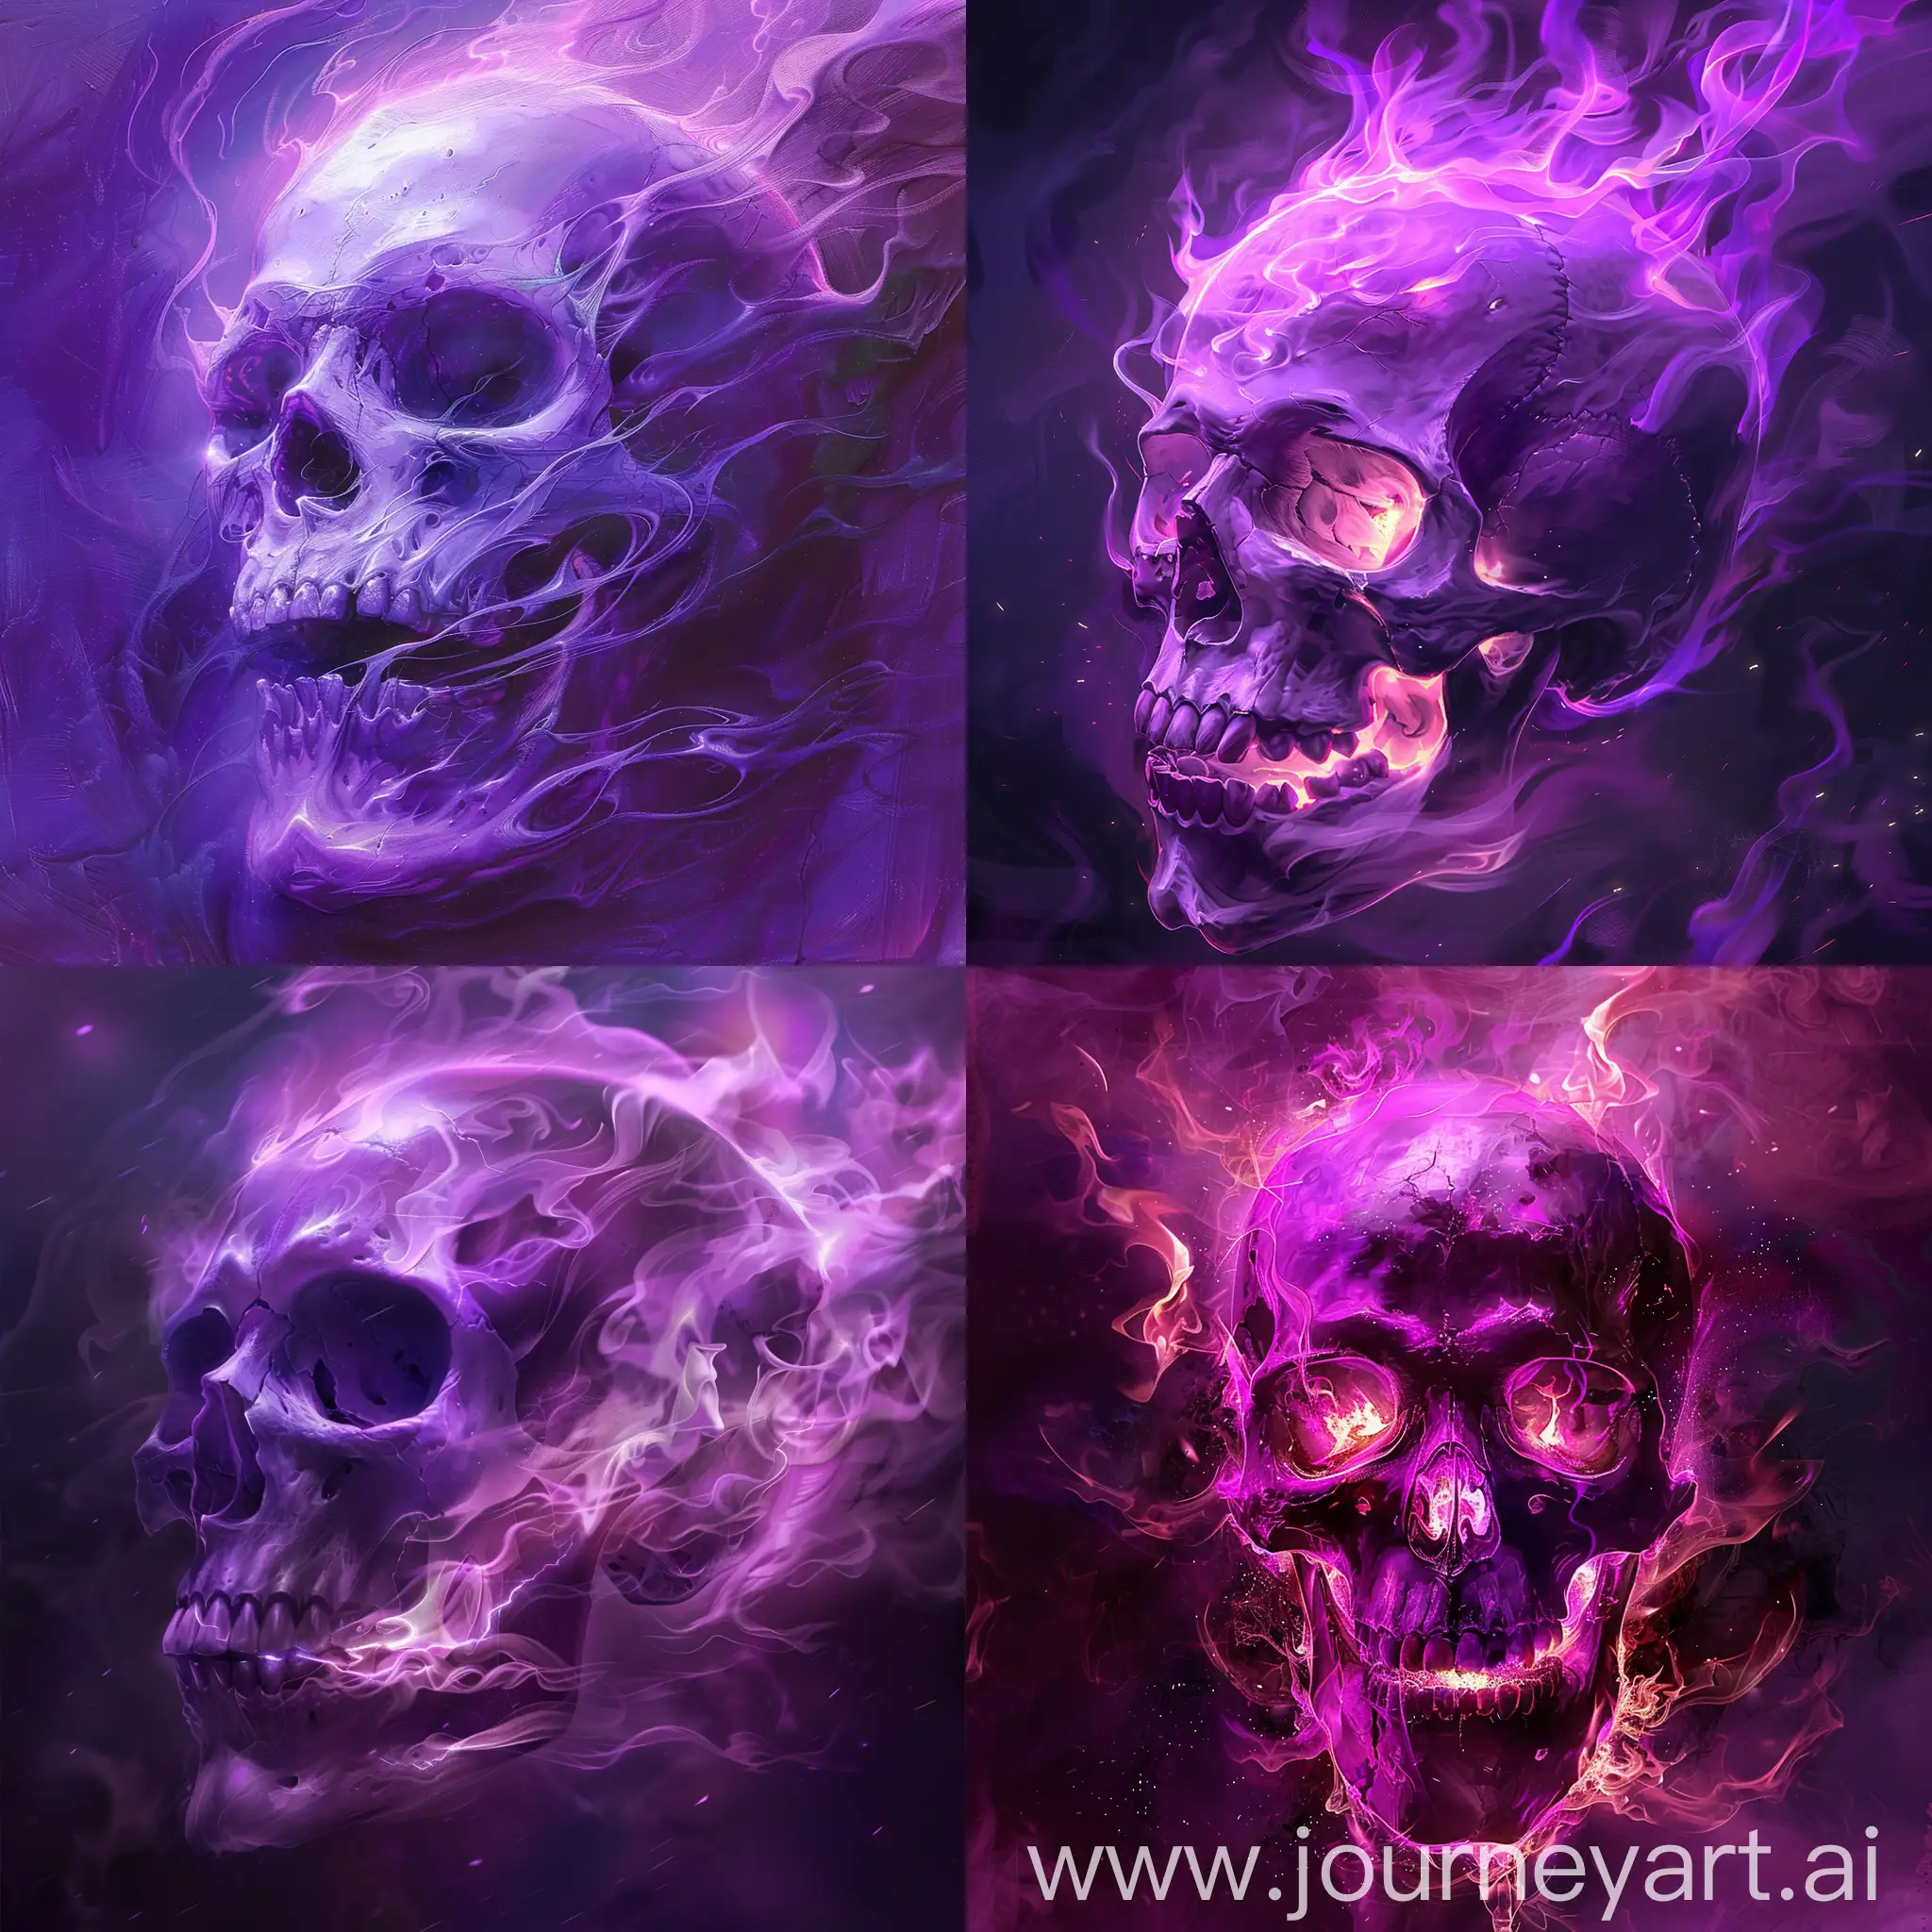 Purple-Flaming-Skull-in-Cool-Artistic-Style